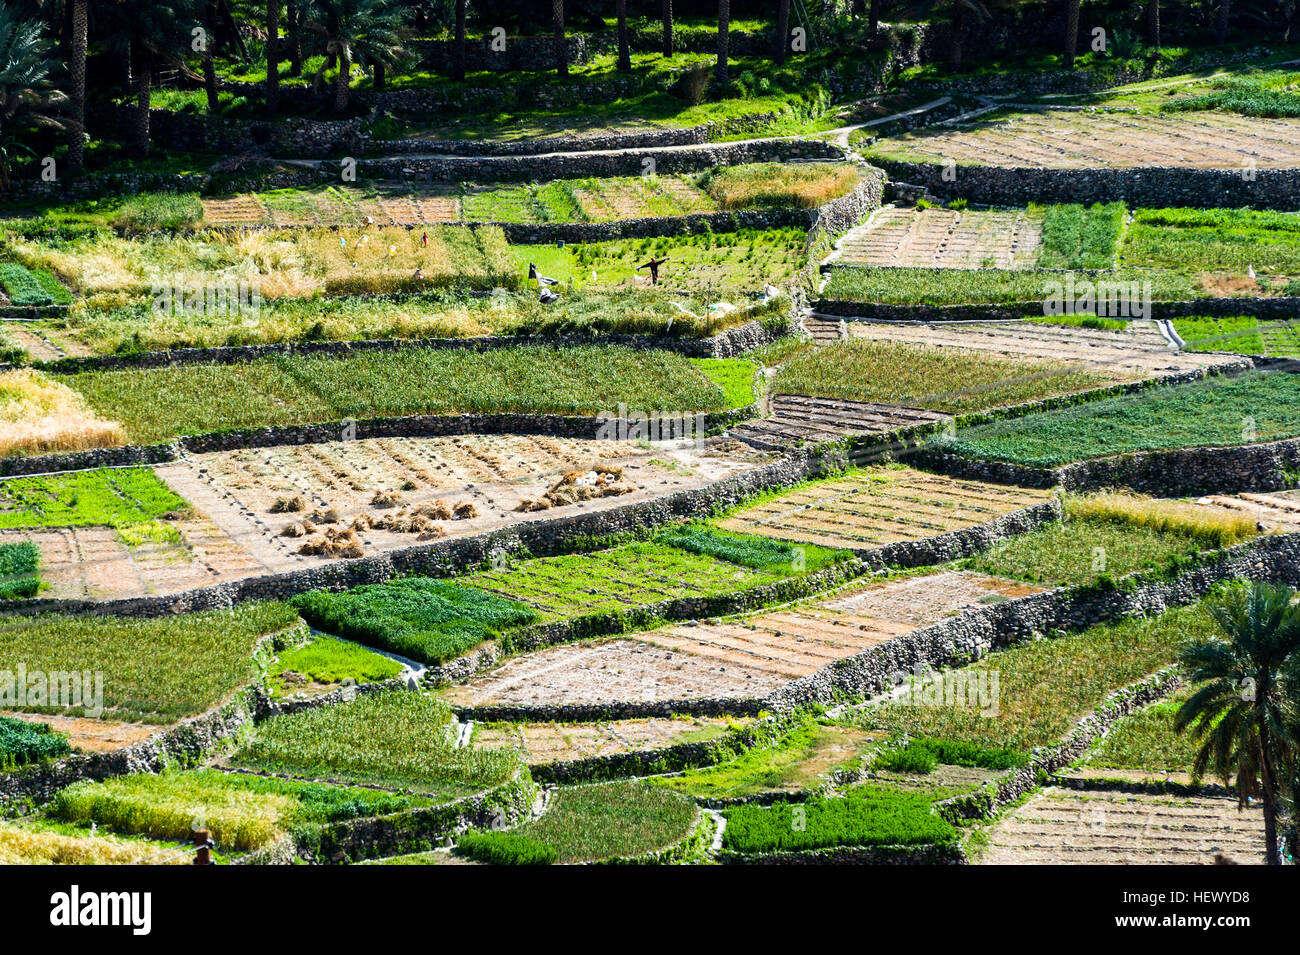 Irrigated terraced farm crops growing garlic, onions and animal feed on the slopes of a desert mountain valley. Stock Photo